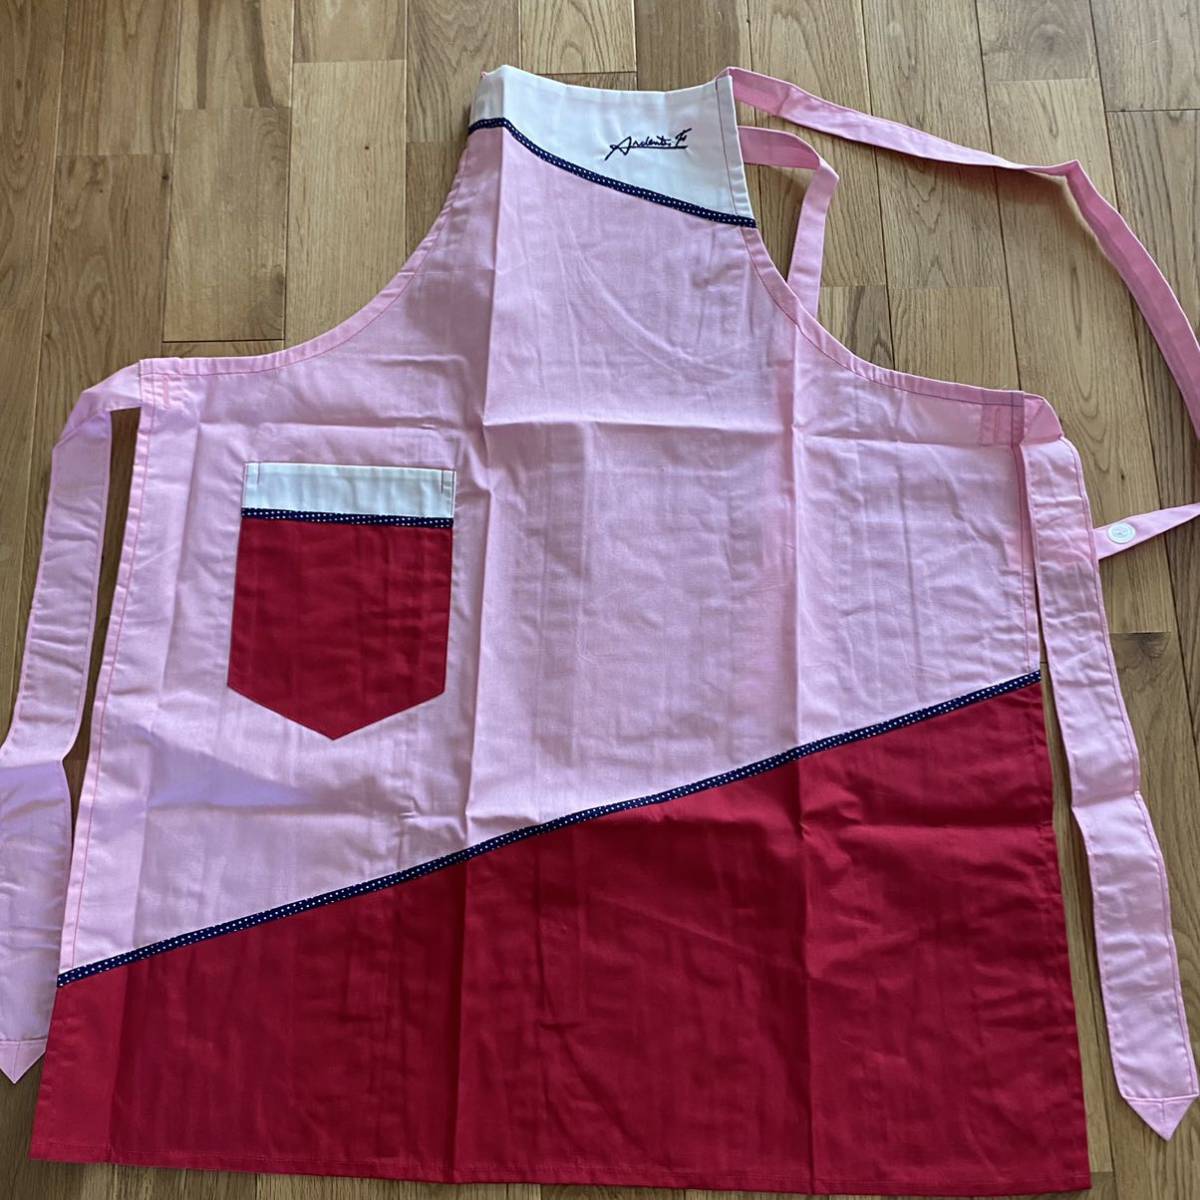  apron Showa Retro red pink series unused made in Japan 